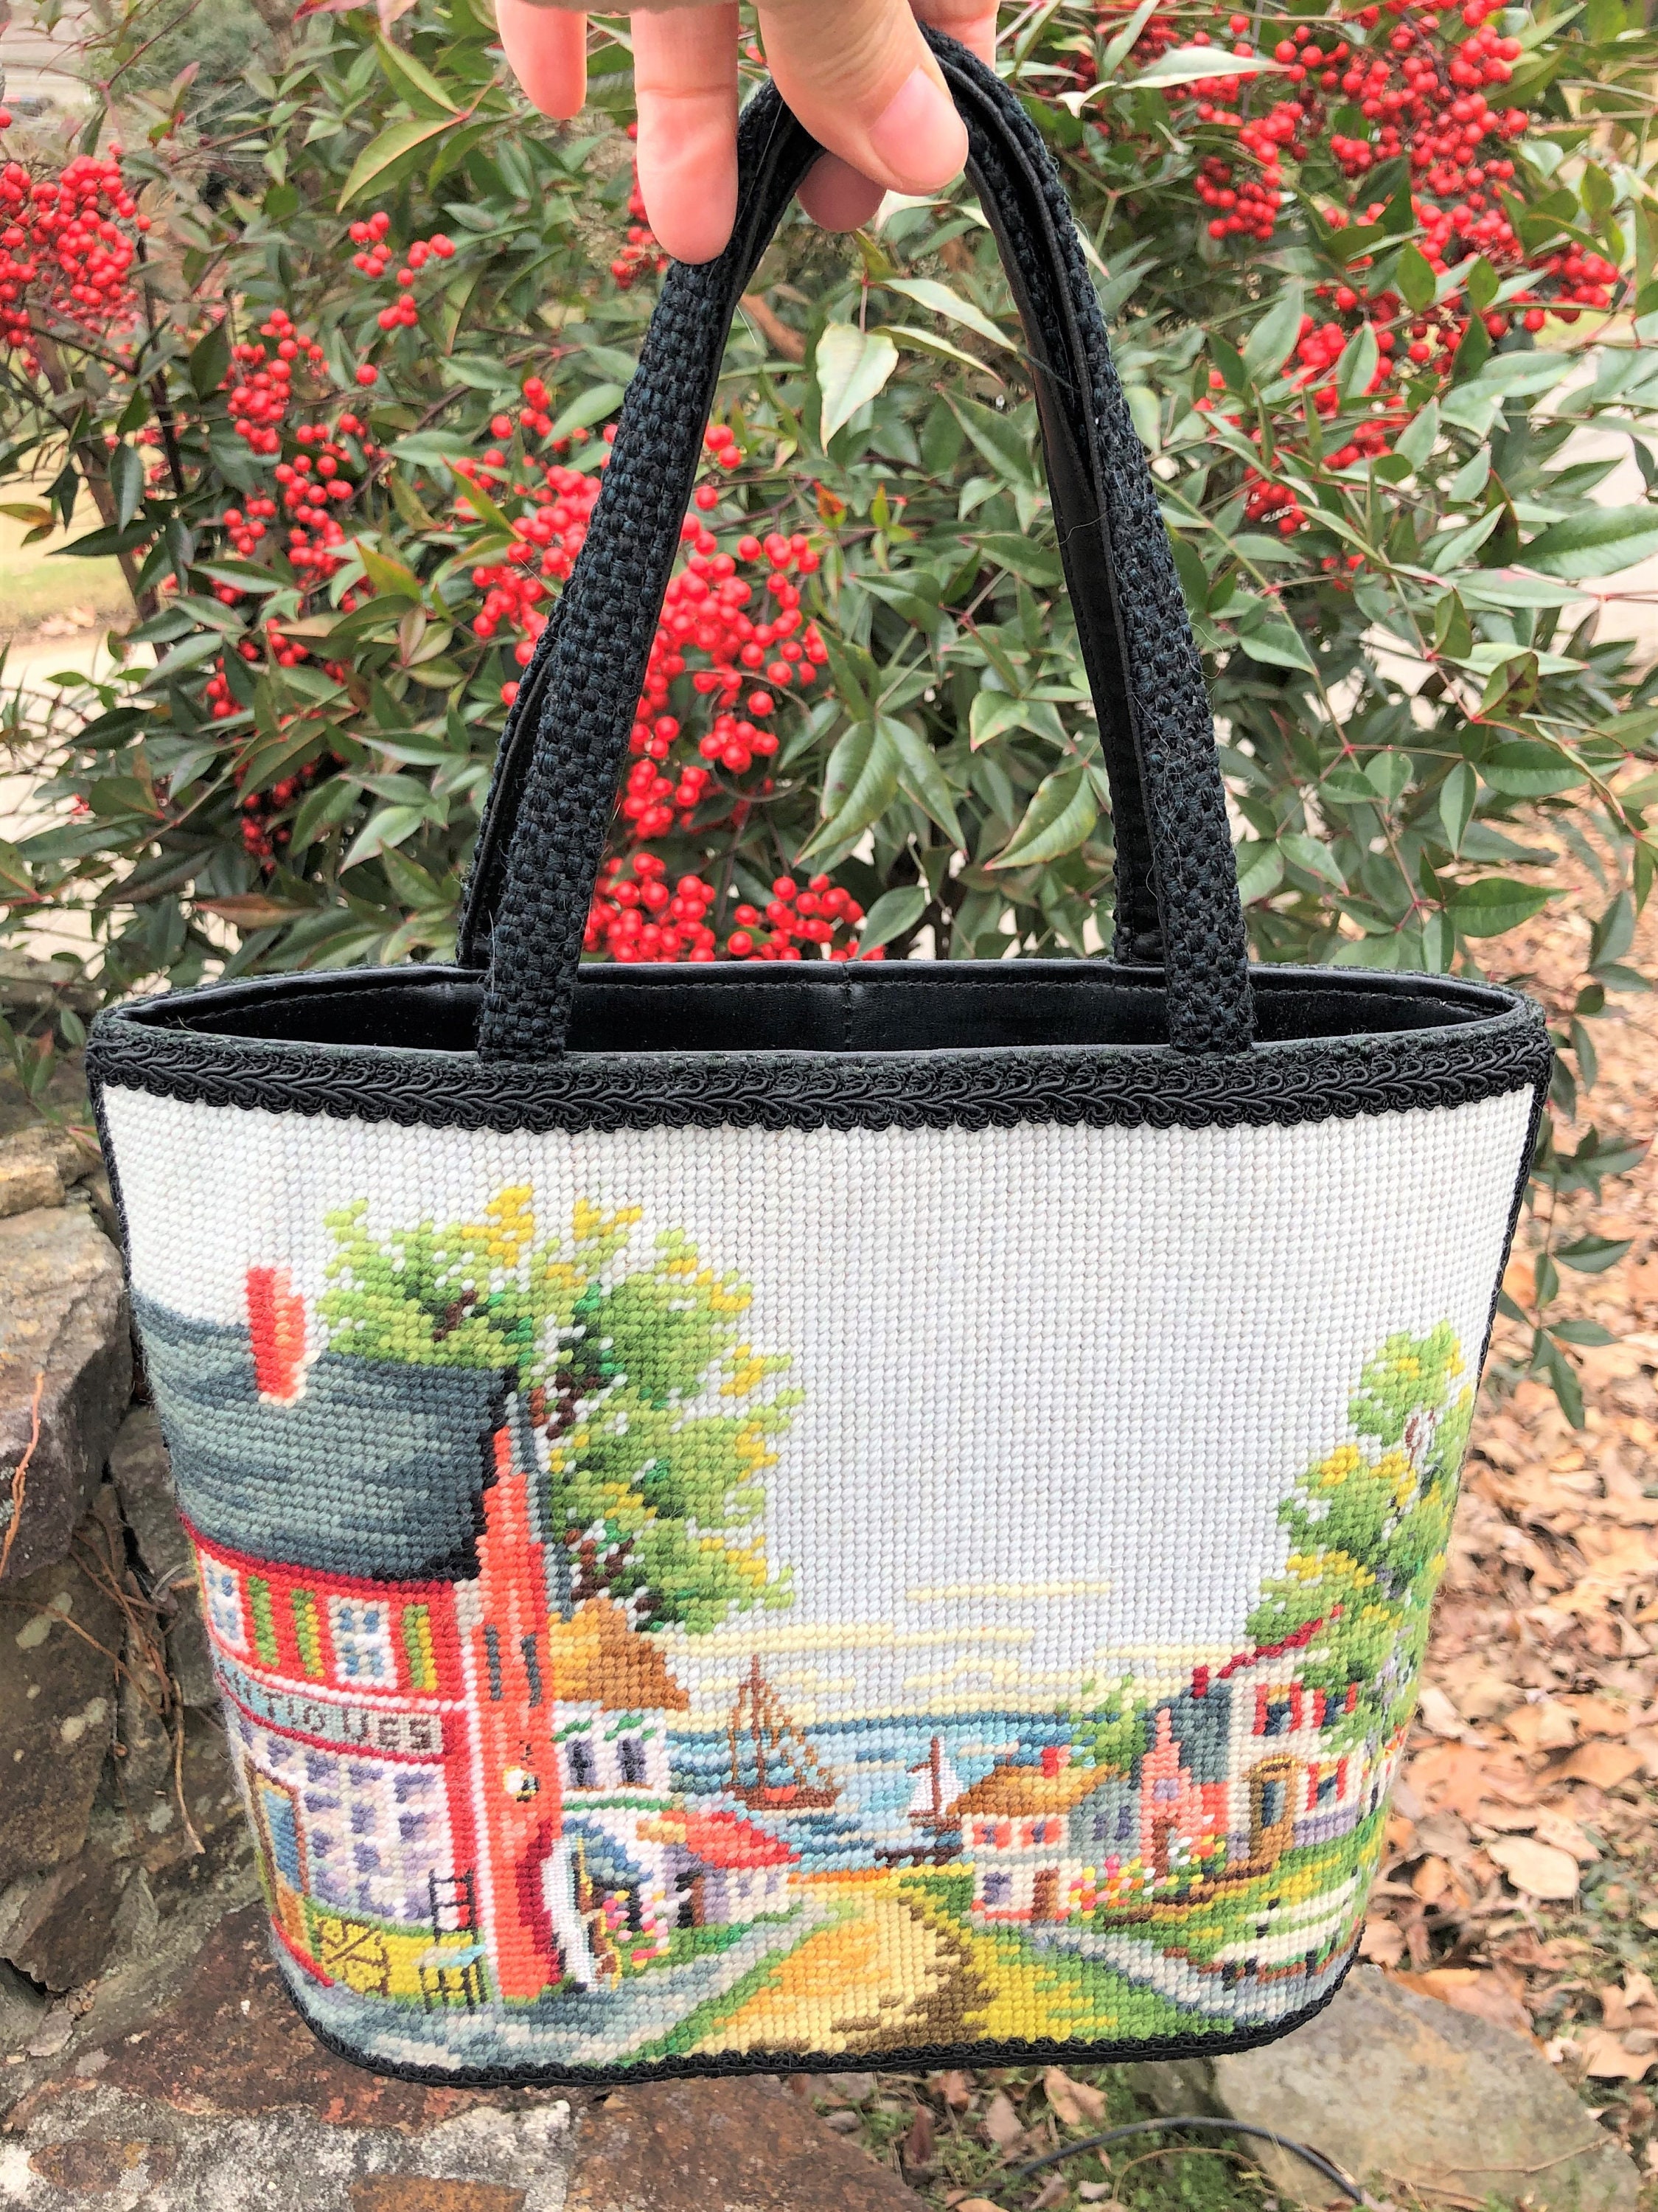 1960s Handmade Needlepoint Bag with Wooden Handles